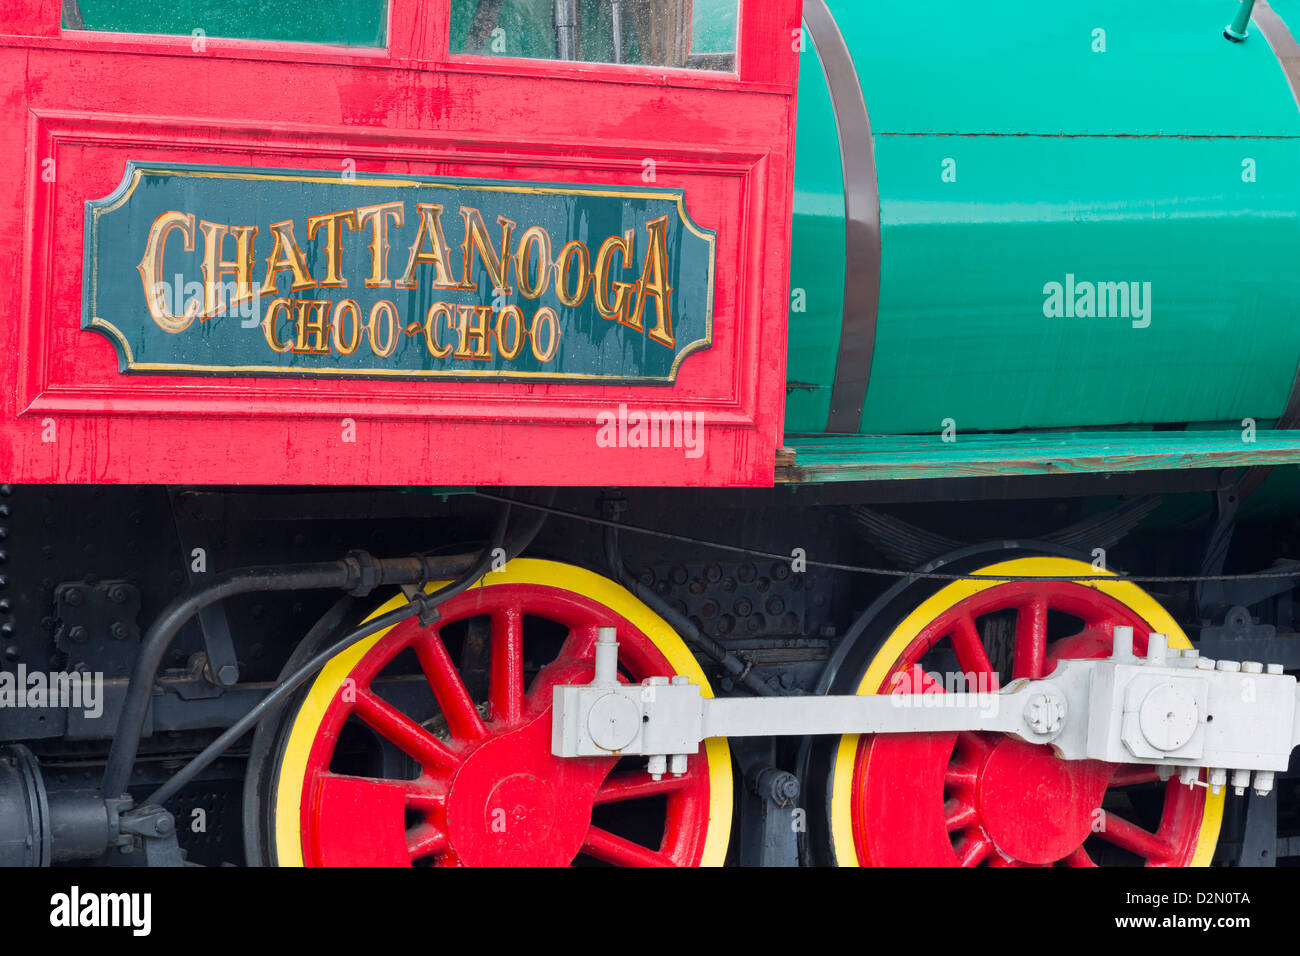 Locomotive at the Chattanooga Choo Choo, Chattanooga, Tennessee, United States of America, North America Stock Photo